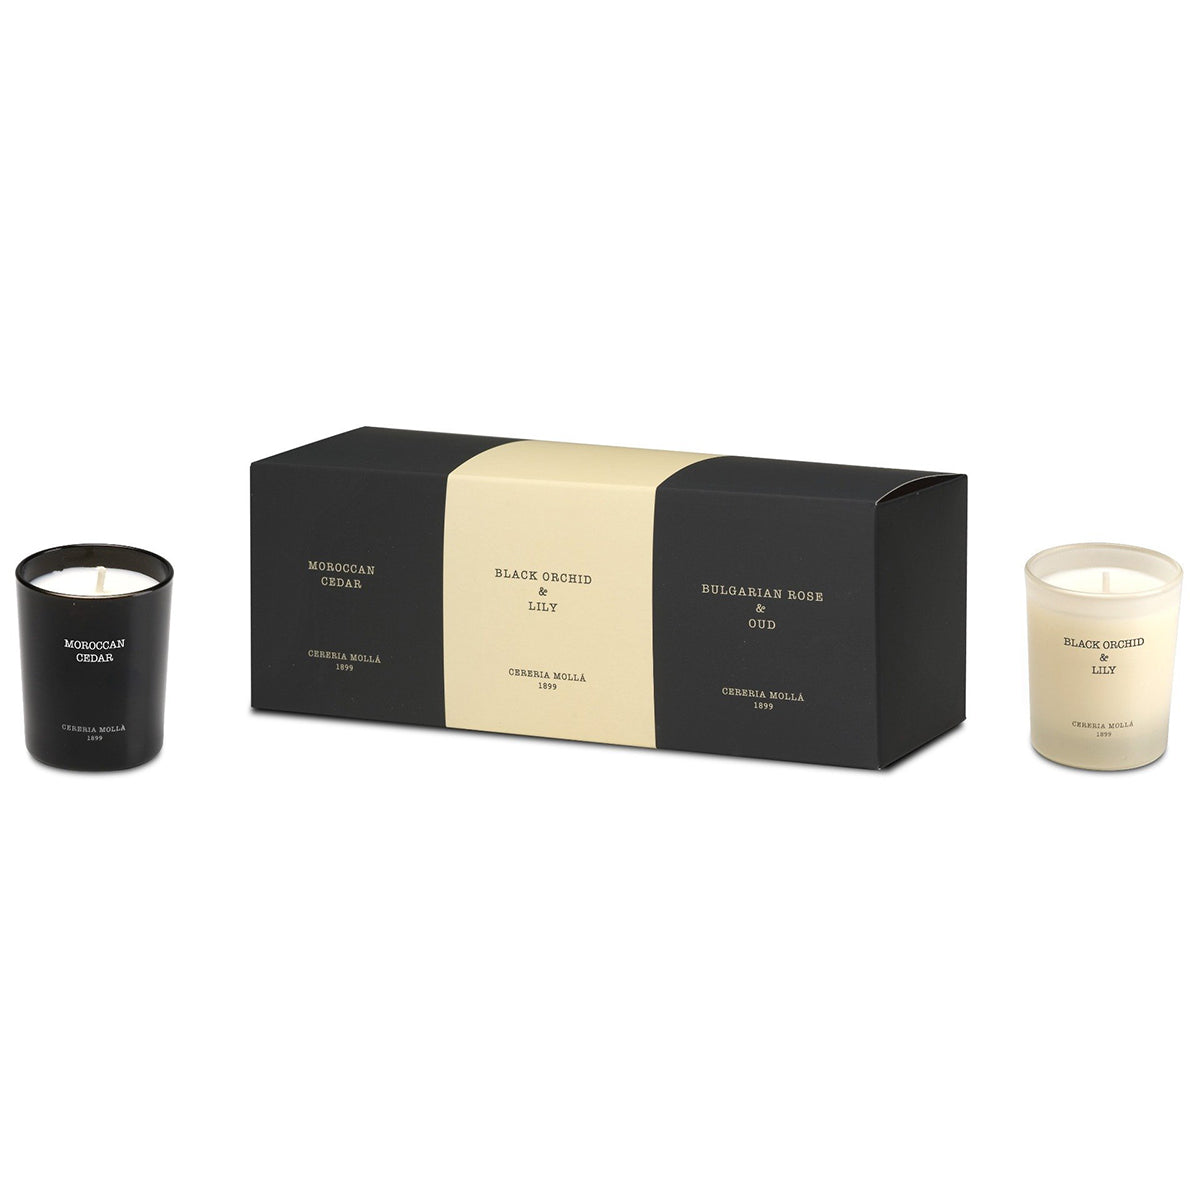 Cereria Molla 3 Votive Luxury Candle Gift Set (Bulgarian Rose, Black Orchid and Lily, Moroccan Cedar)